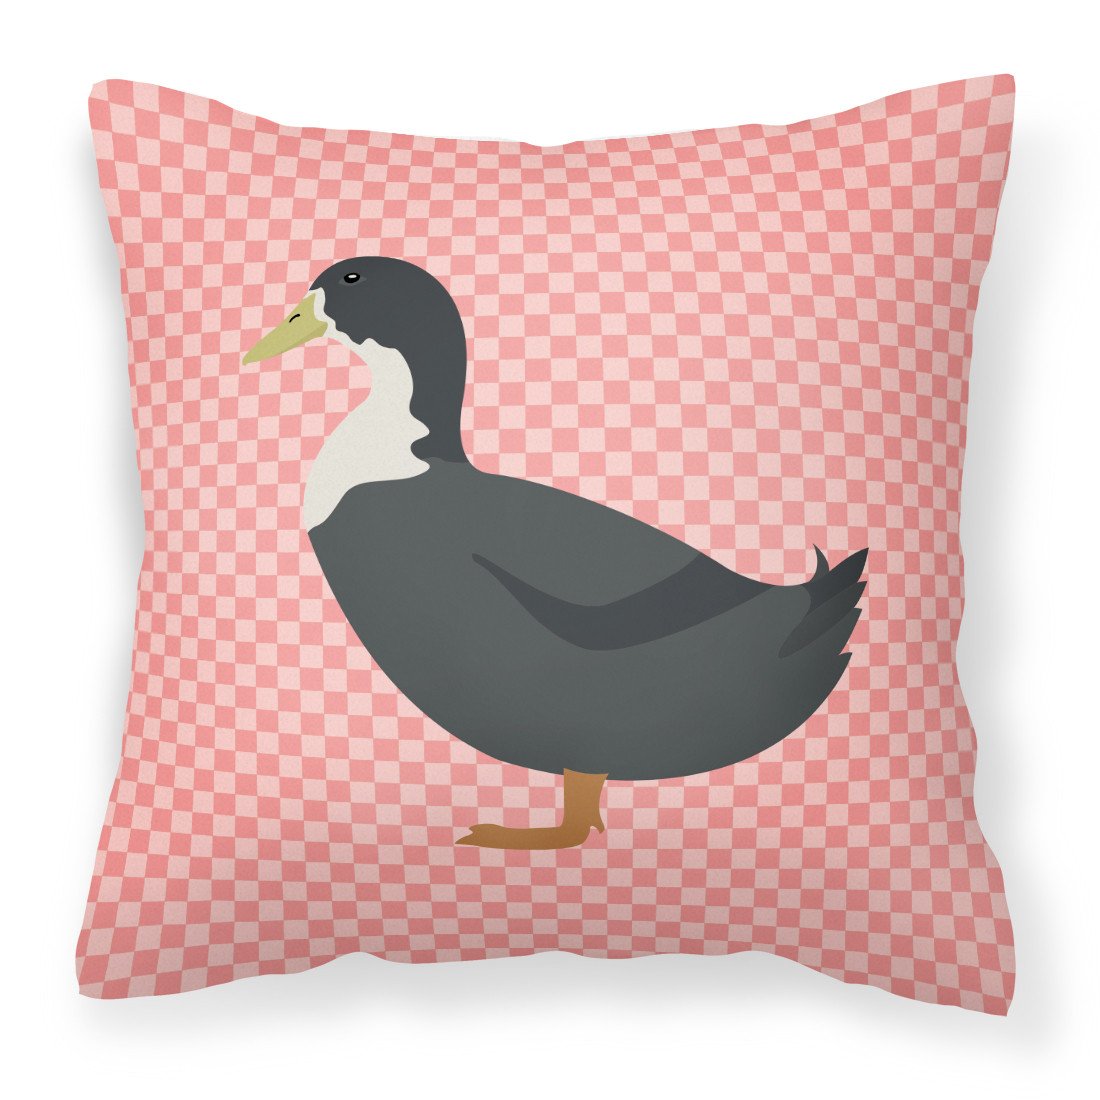 Blue Swedish Duck Pink Check Fabric Decorative Pillow BB7862PW1818 by Caroline's Treasures